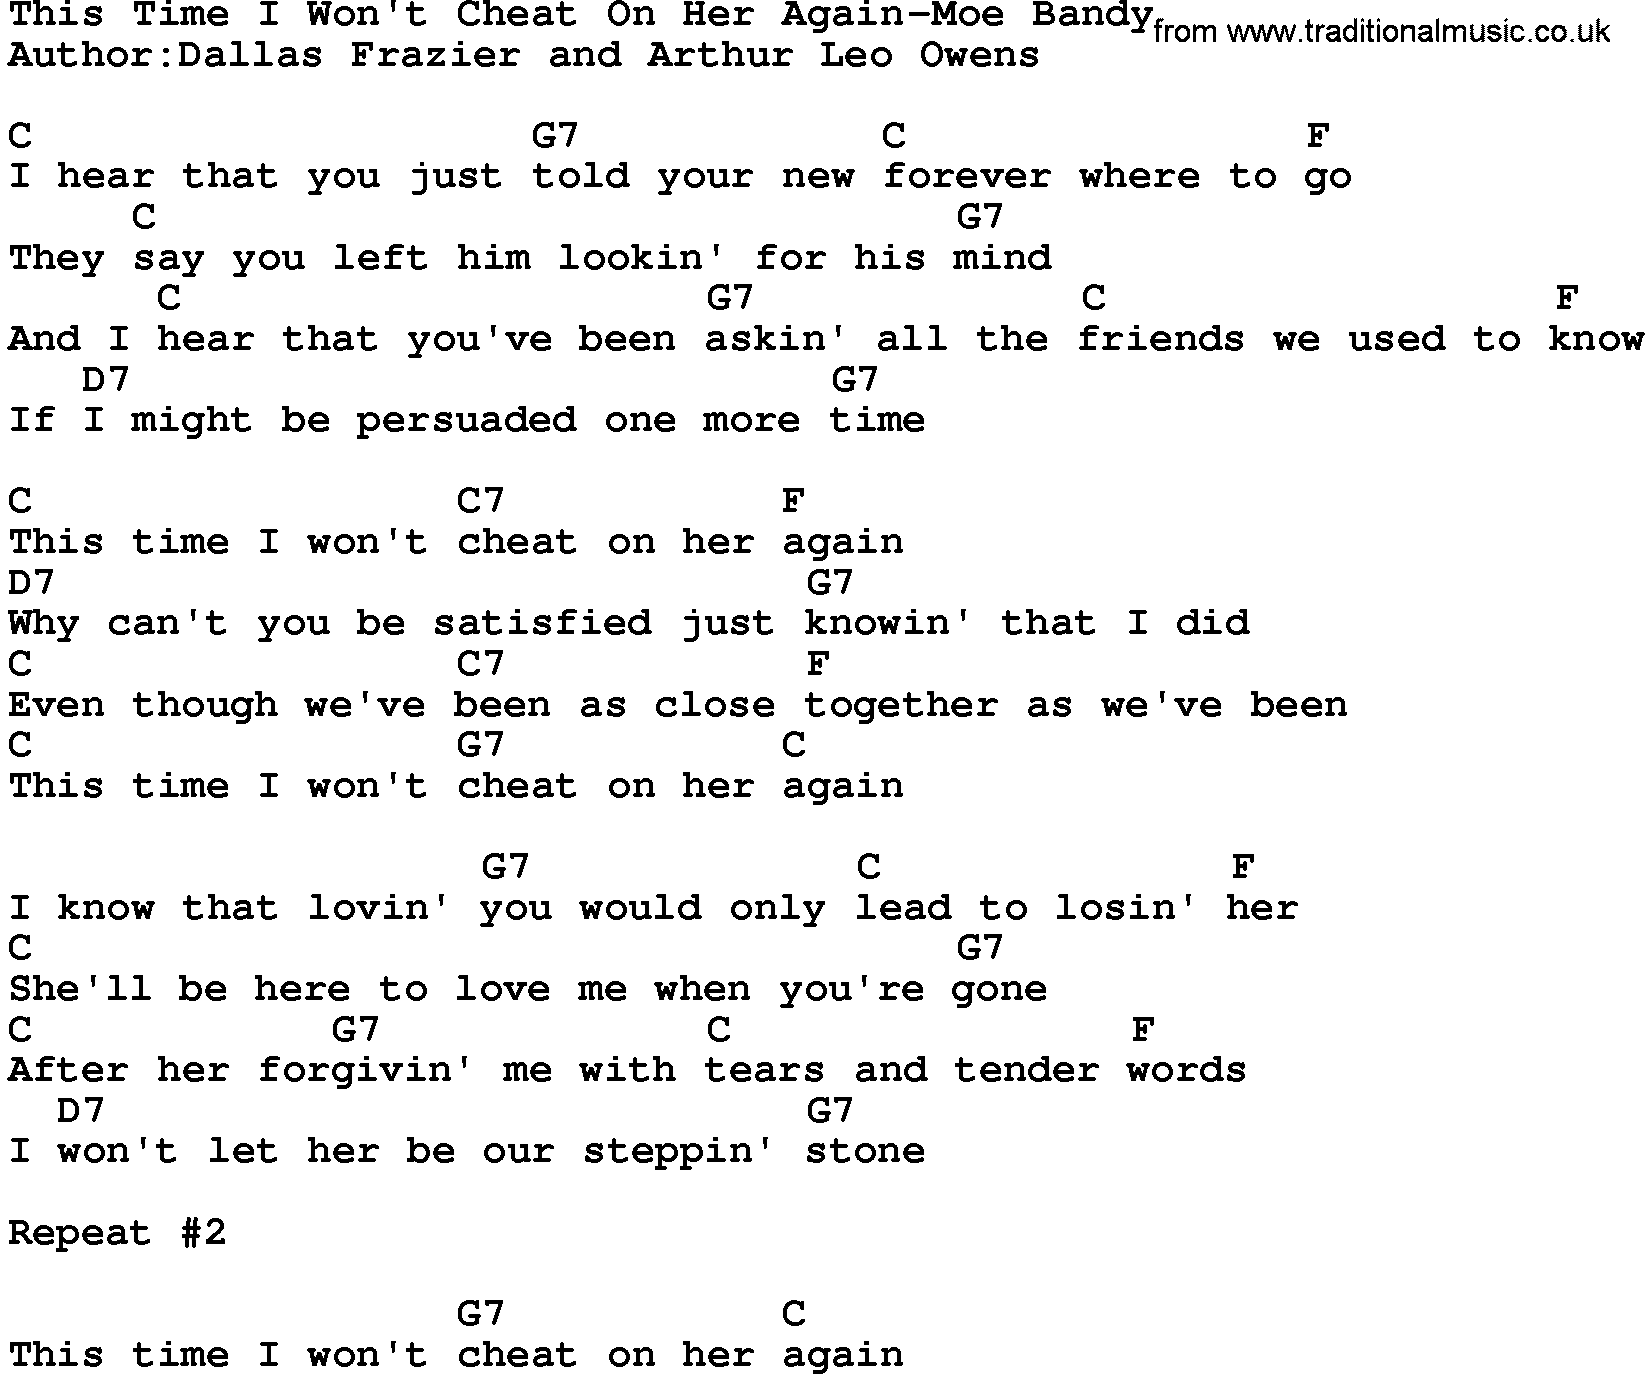 Country music song: This Time I Won't Cheat On Her Again-Moe Bandy lyrics and chords